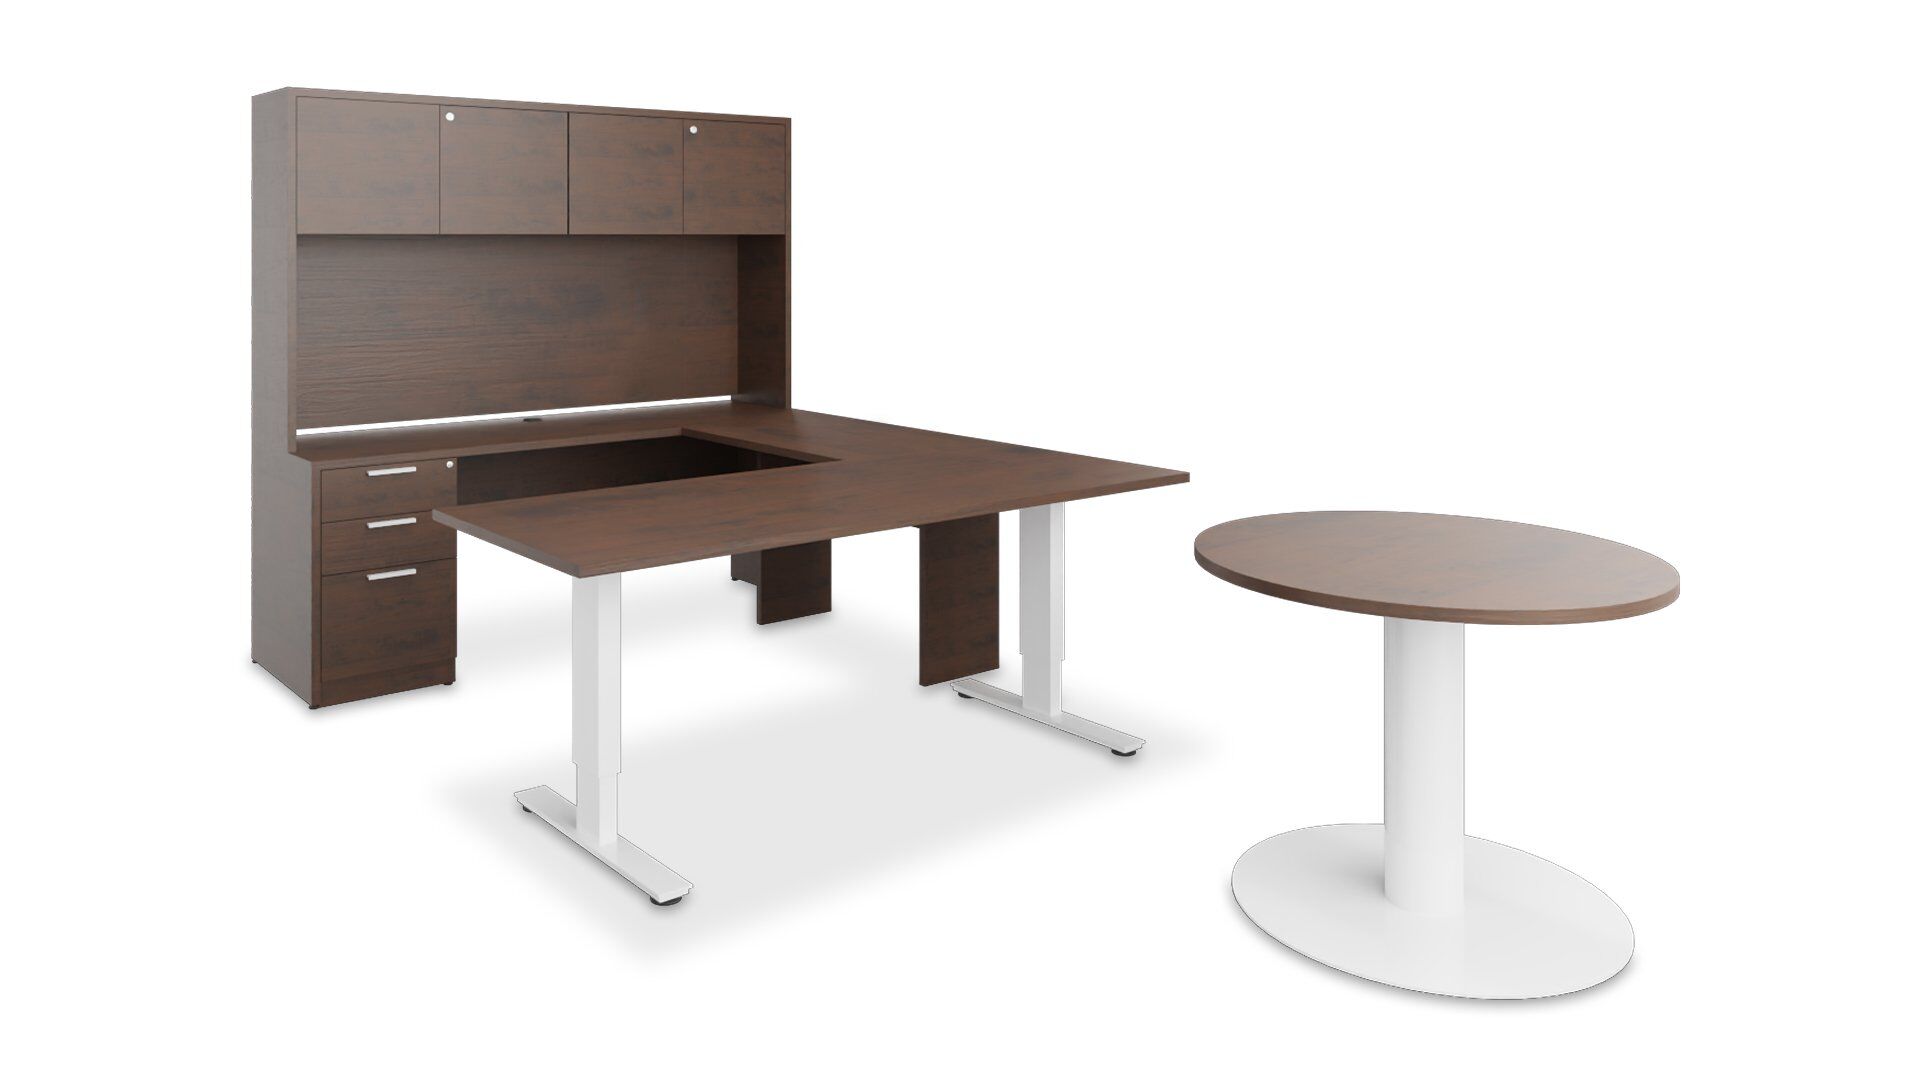 Typical u-shape office furniture: Height adjustable desk, hutch with mixed storage and a meeting table